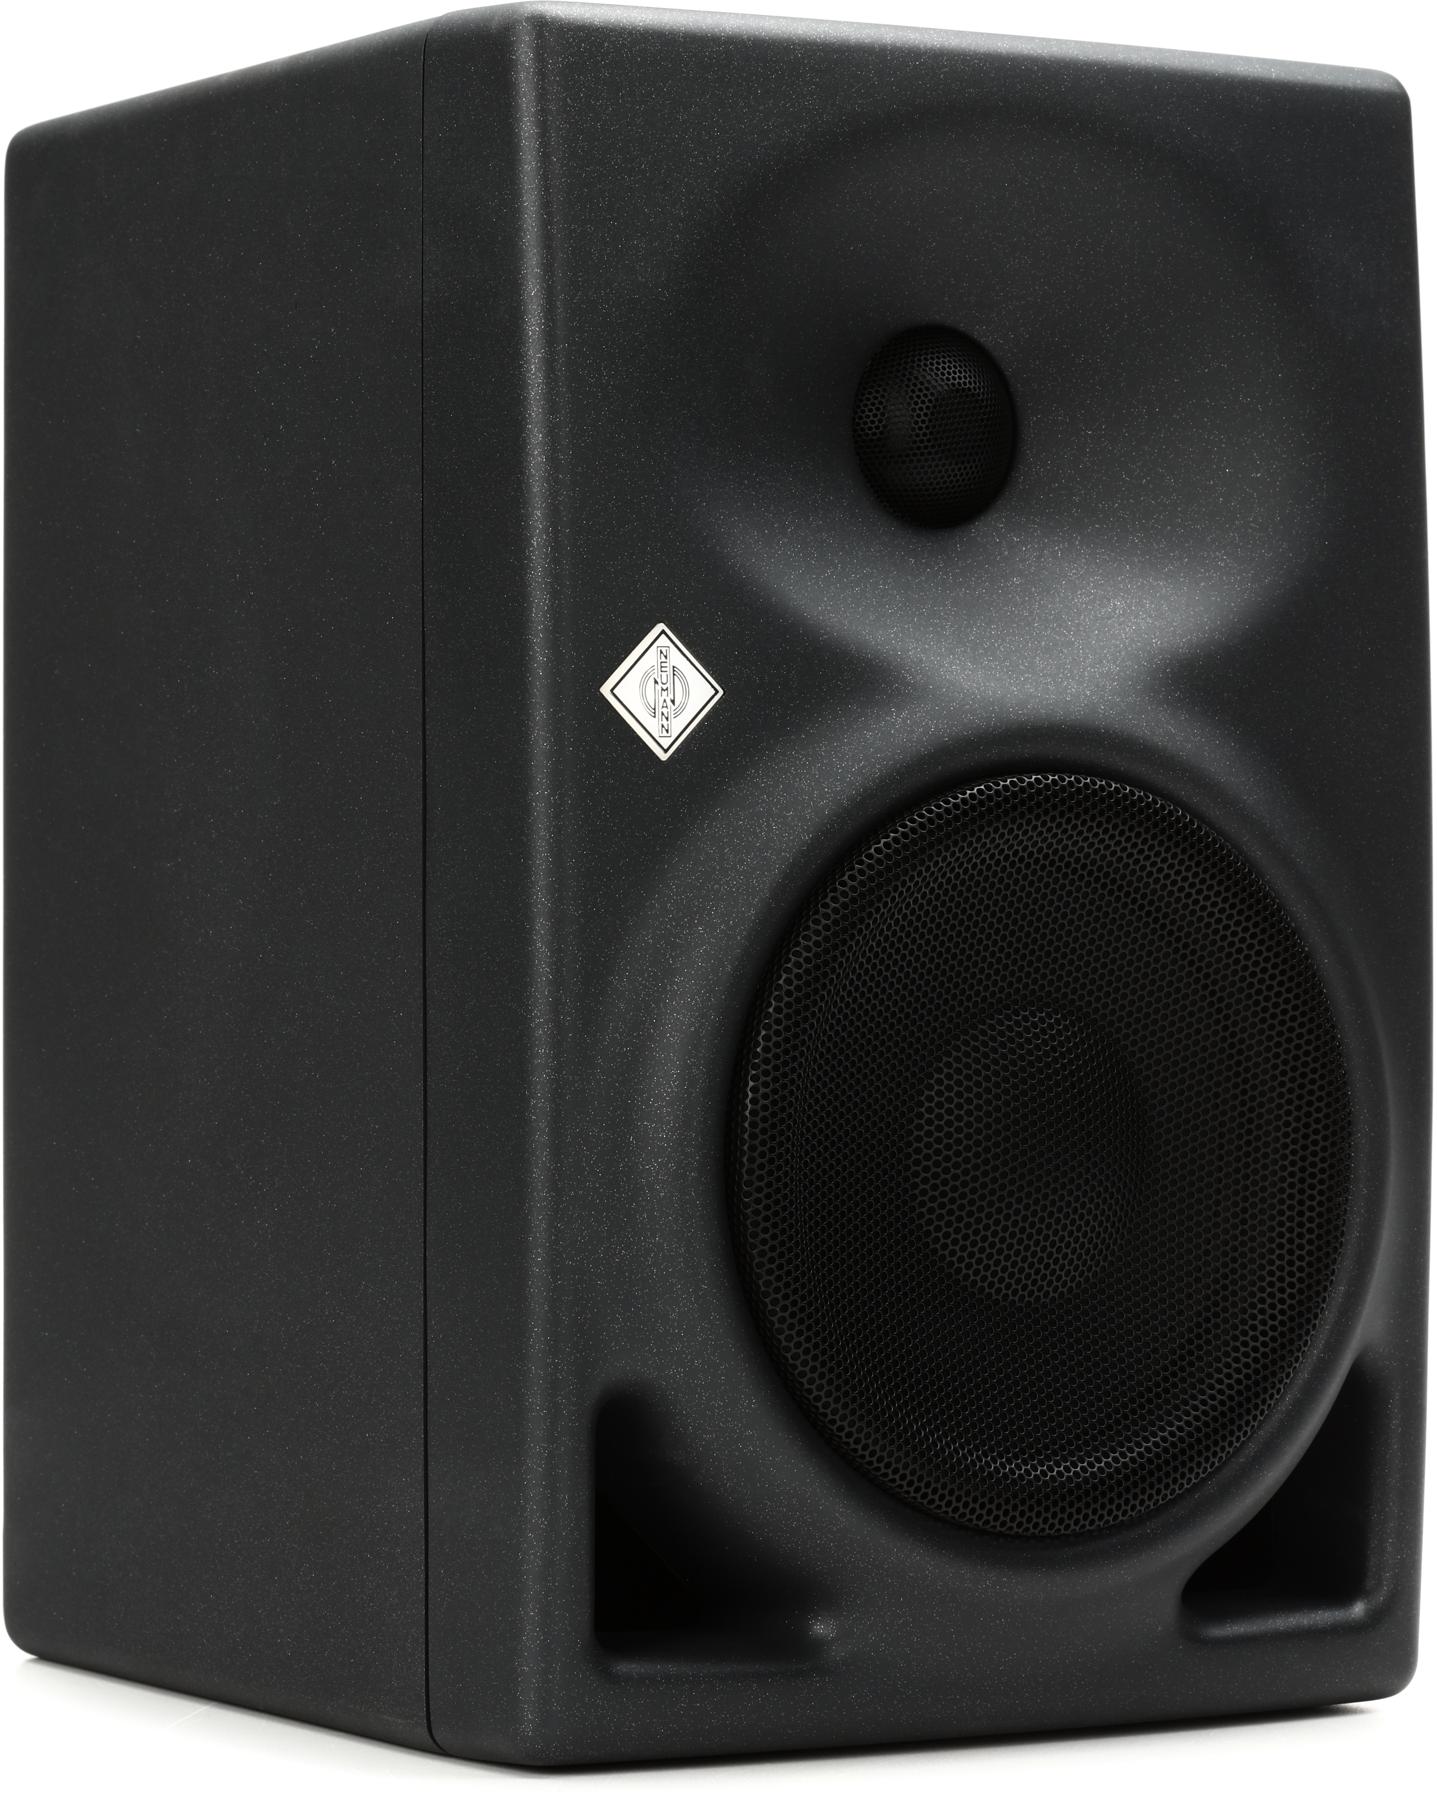 Neumann KH 120 A 5.25 inch Powered Studio Monitor - Anthracite main image